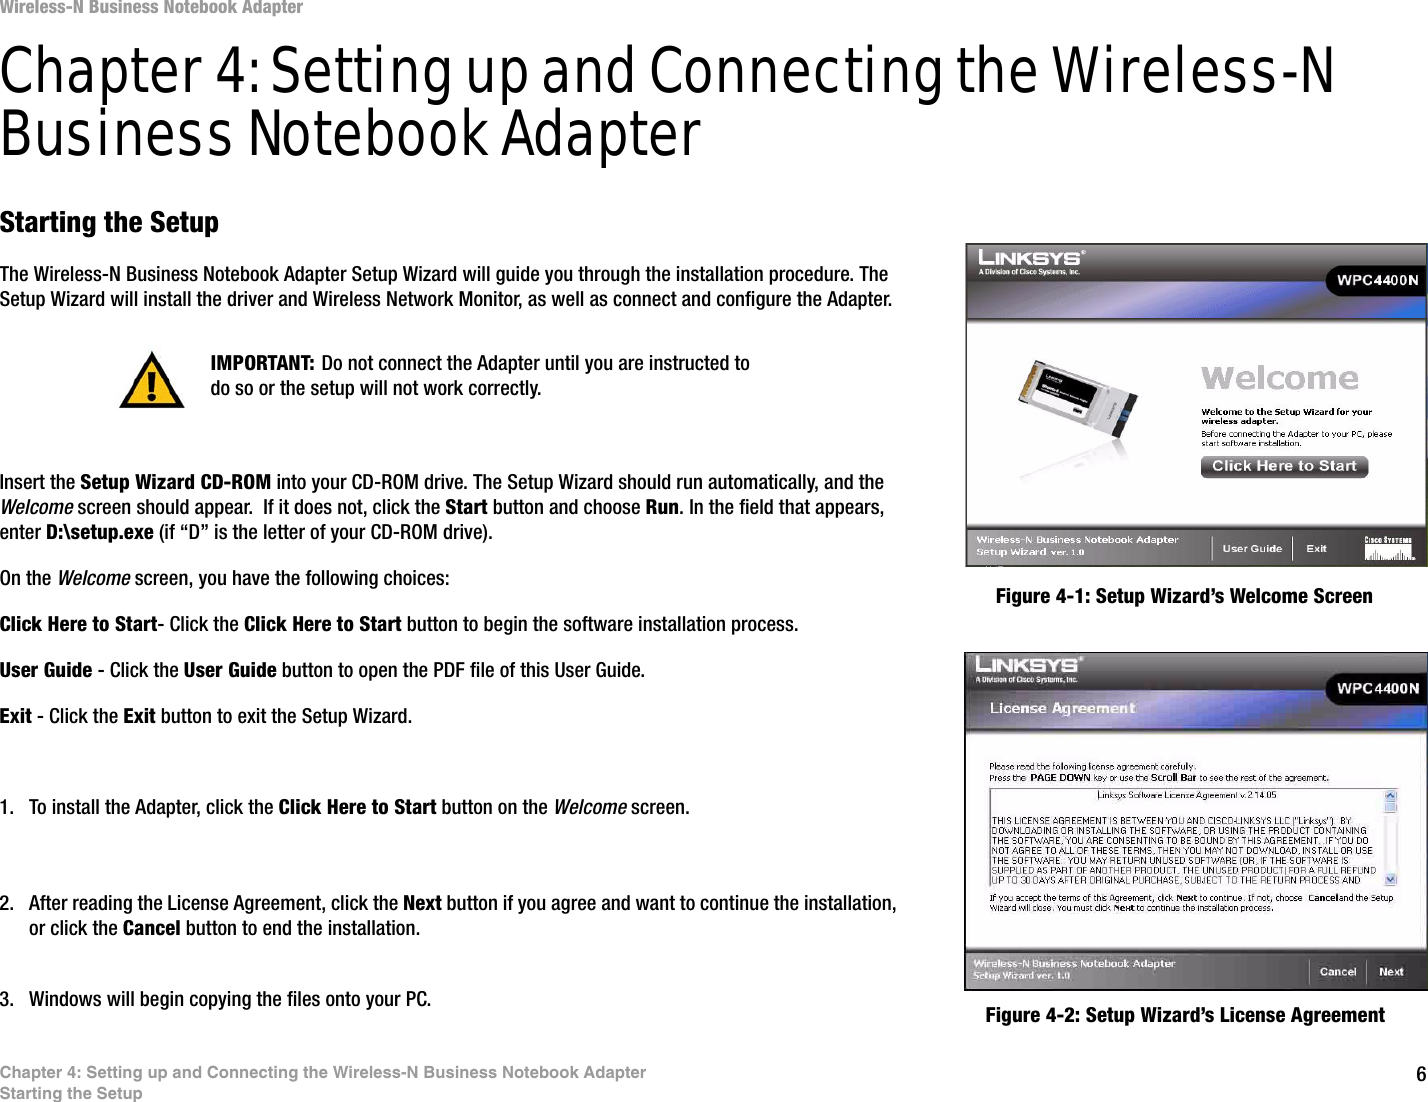 6Chapter 4: Setting up and Connecting the Wireless-N Business Notebook AdapterStarting the SetupWireless-N Business Notebook AdapterChapter 4: Setting up and Connecting the Wireless-N Business Notebook AdapterStarting the SetupThe Wireless-N Business Notebook Adapter Setup Wizard will guide you through the installation procedure. The Setup Wizard will install the driver and Wireless Network Monitor, as well as connect and configure the Adapter.Insert the Setup Wizard CD-ROM into your CD-ROM drive. The Setup Wizard should run automatically, and the Welcome screen should appear.  If it does not, click the Start button and choose Run. In the field that appears, enter D:\setup.exe (if “D” is the letter of your CD-ROM drive). On the Welcome screen, you have the following choices:Click Here to Start- Click the Click Here to Start button to begin the software installation process. User Guide - Click the User Guide button to open the PDF file of this User Guide. Exit - Click the Exit button to exit the Setup Wizard.1. To install the Adapter, click the Click Here to Start button on the Welcome screen.2. After reading the License Agreement, click the Next button if you agree and want to continue the installation, or click the Cancel button to end the installation.3. Windows will begin copying the files onto your PC. Figure 4-1: Setup Wizard’s Welcome ScreenFigure 4-2: Setup Wizard’s License AgreementIMPORTANT: Do not connect the Adapter until you are instructed to do so or the setup will not work correctly.